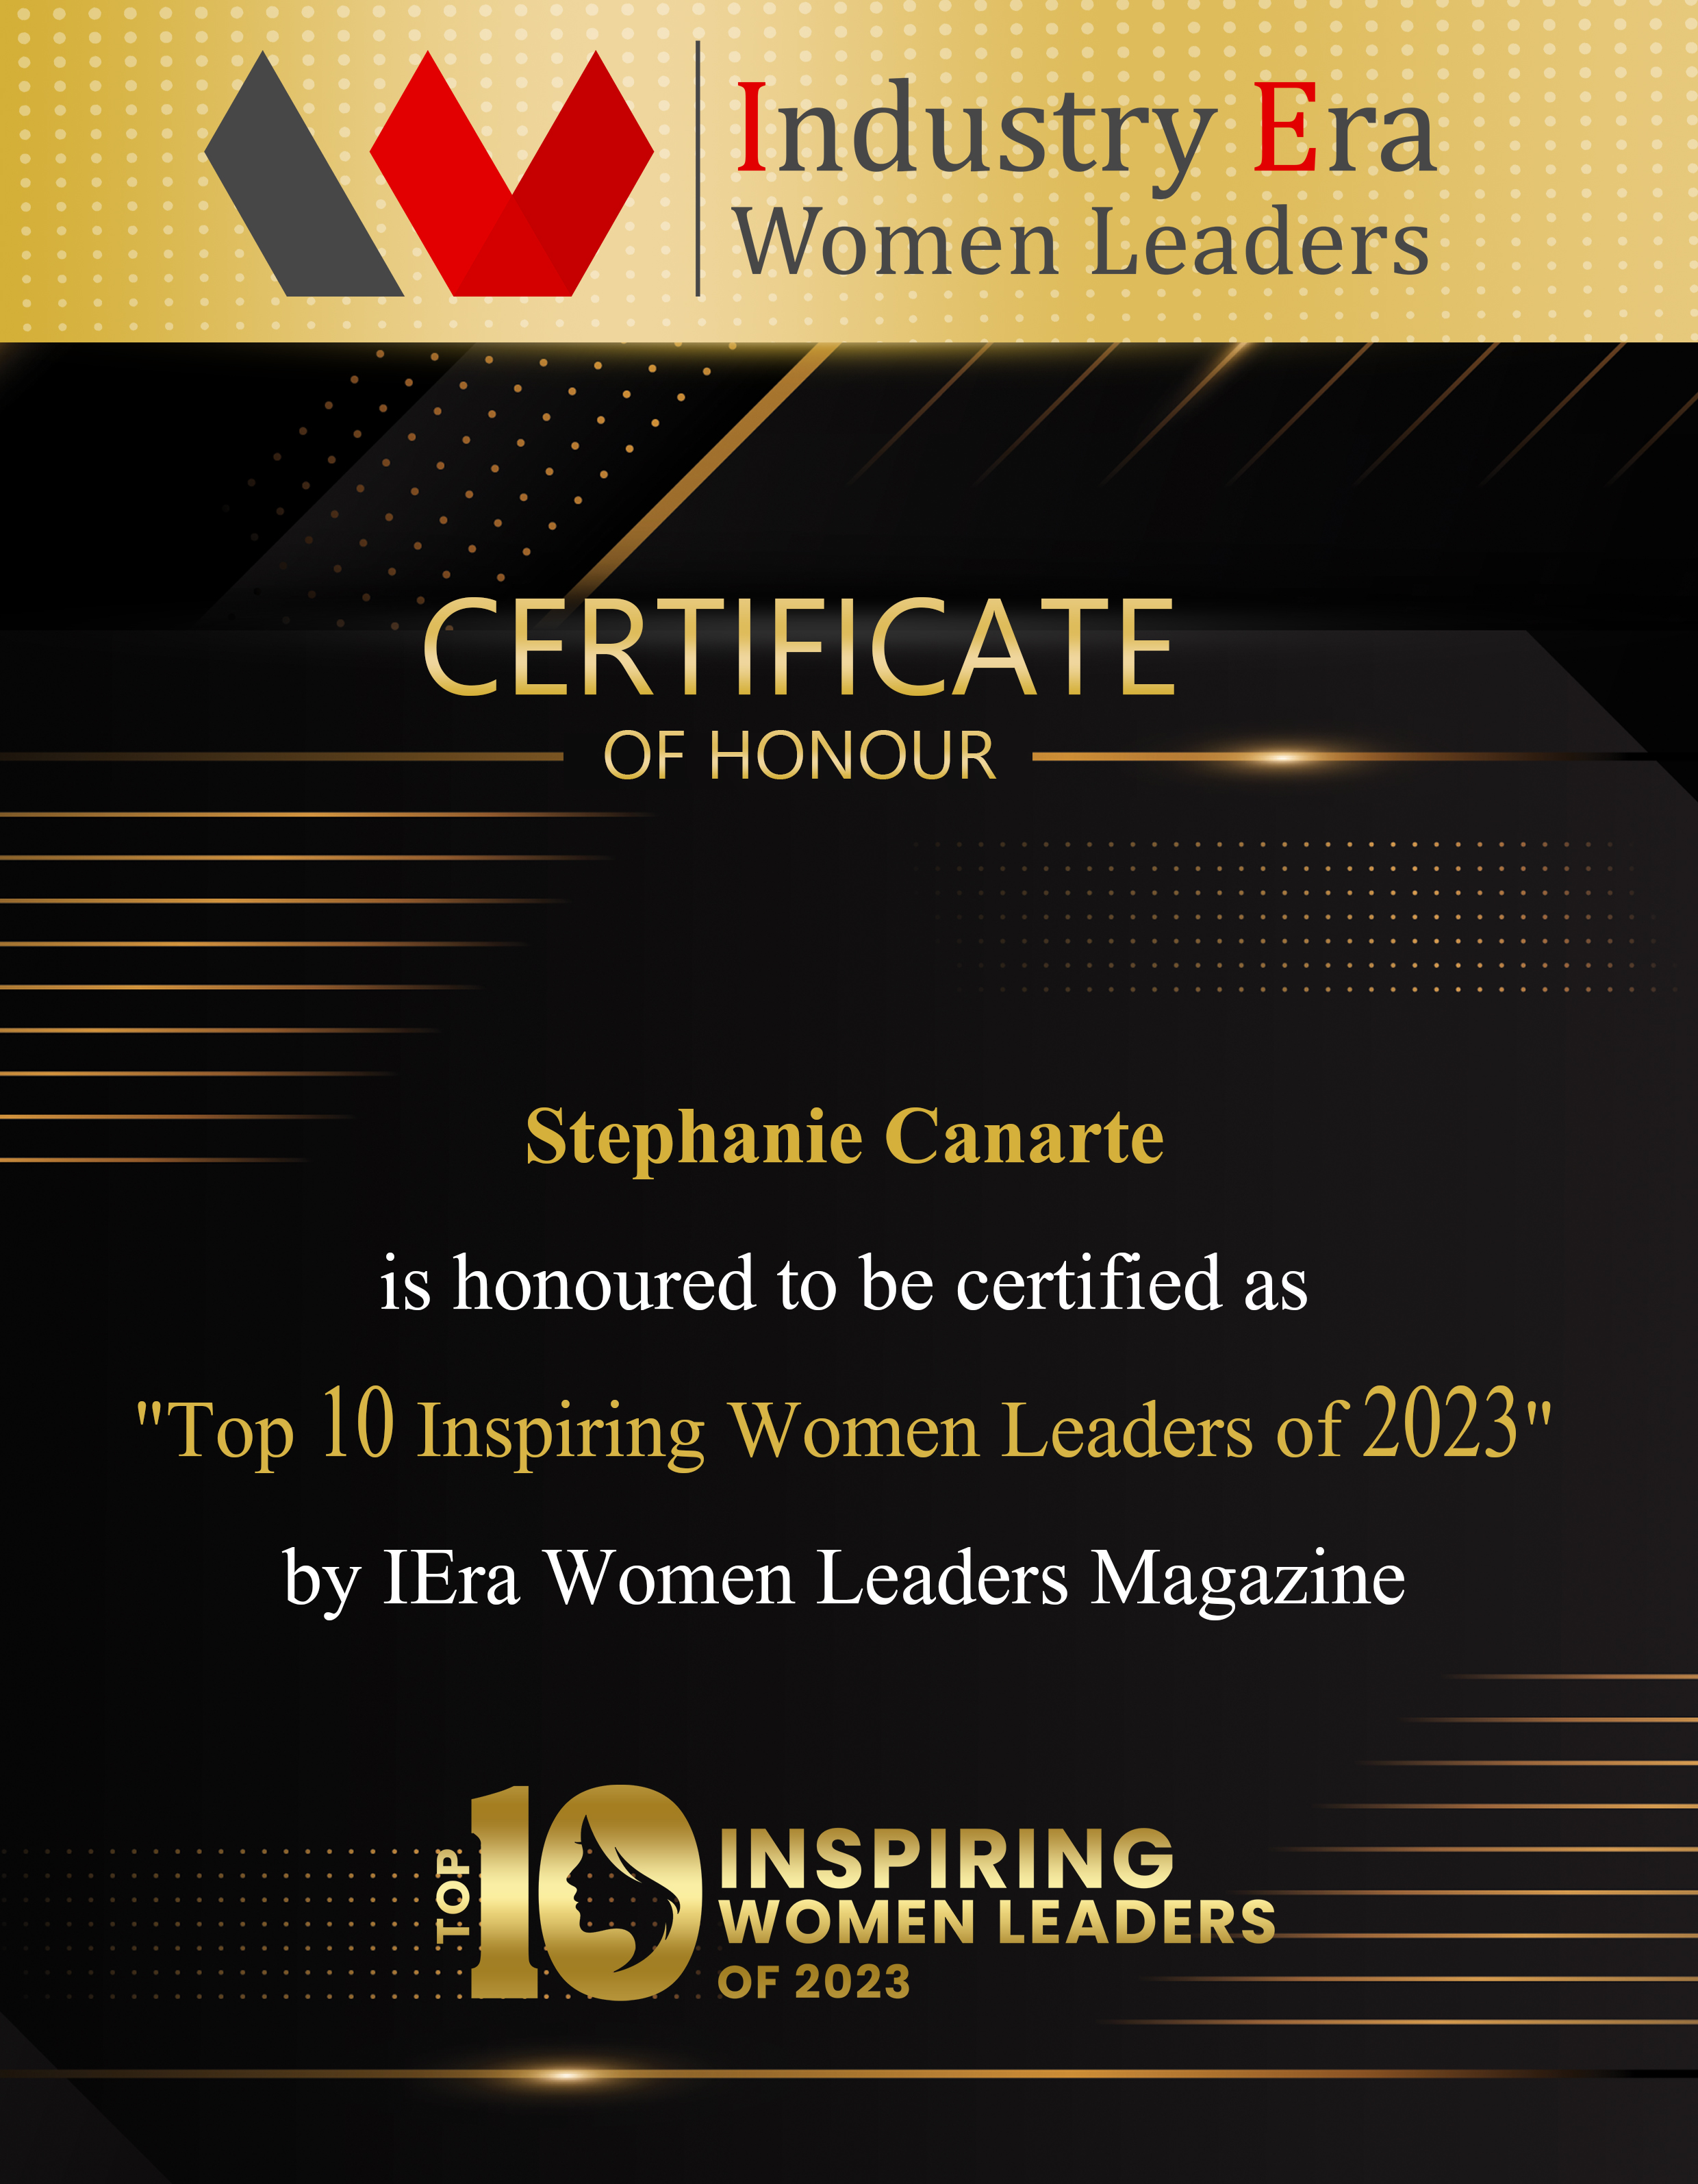 Stephanie Canarte, Director of Marketing at TO Live, Top 10 Inspiring Women Leaders of 2022